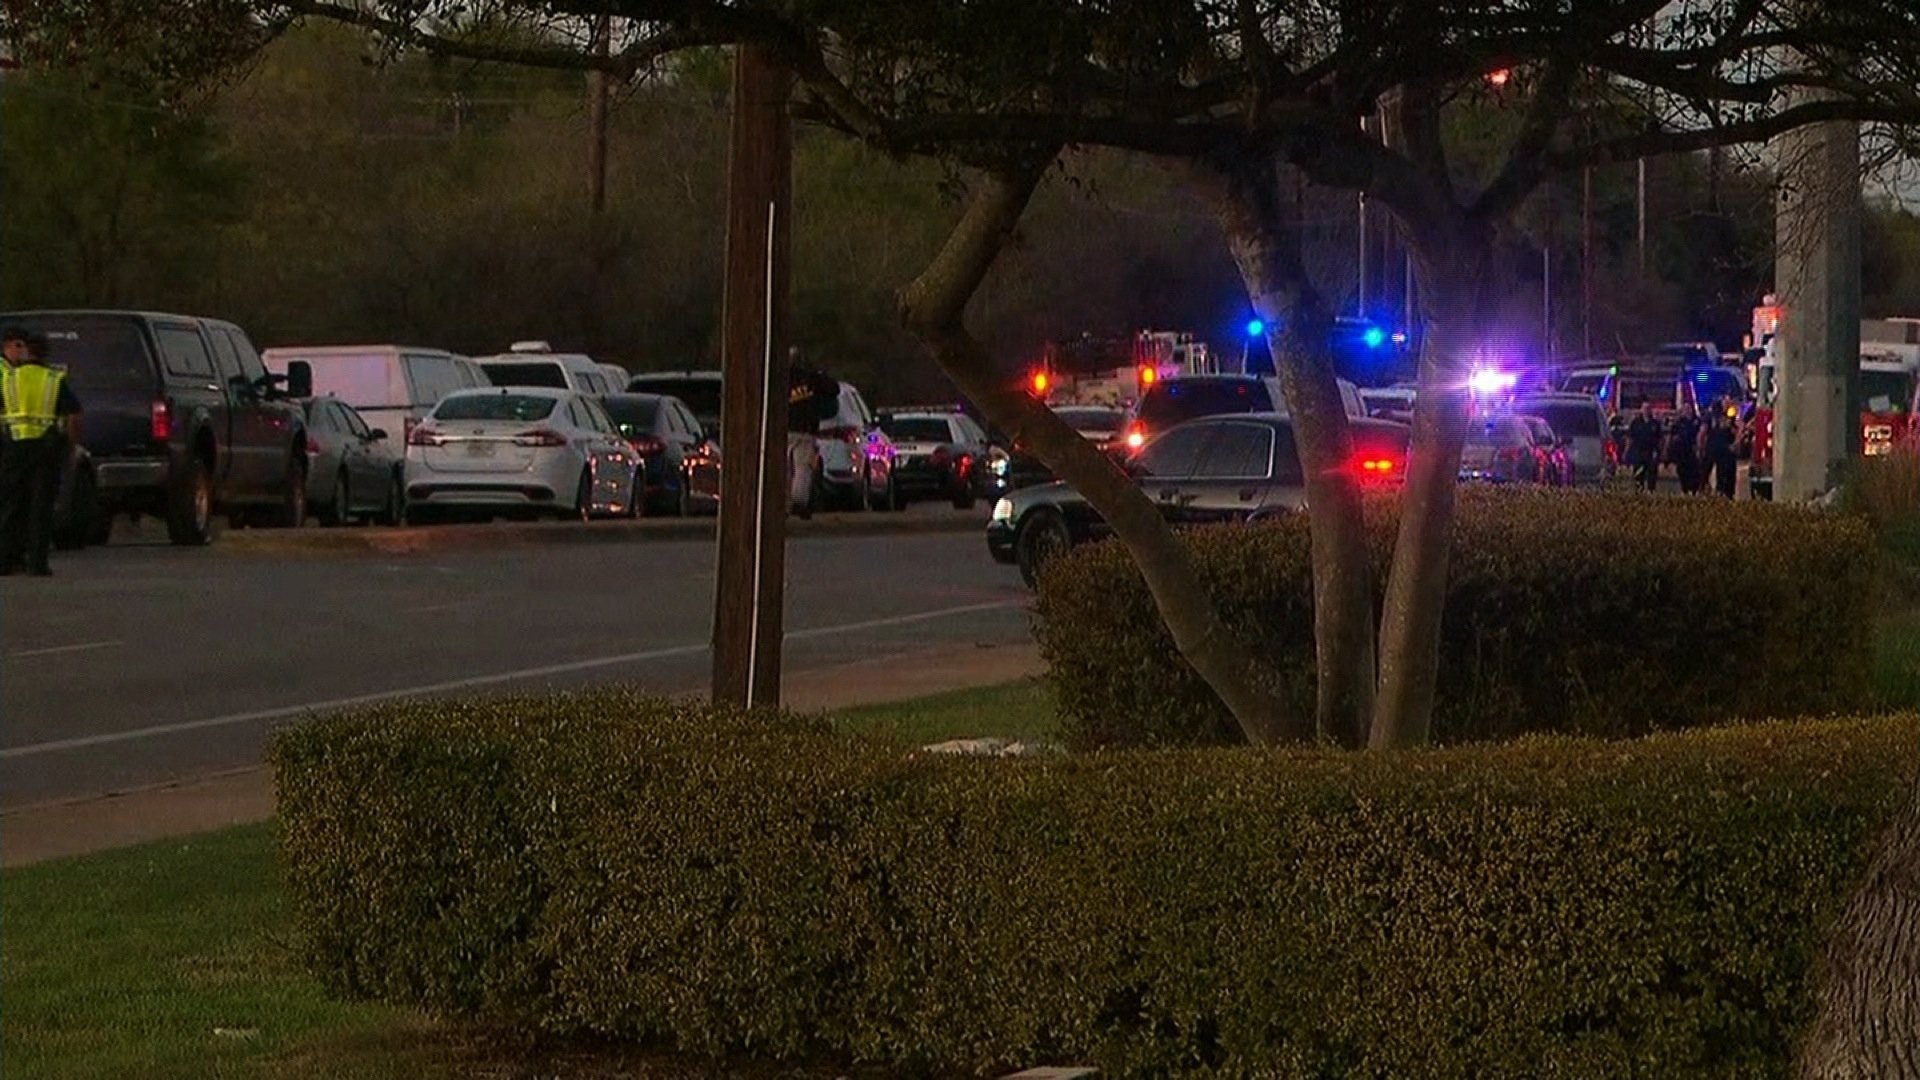 Package explodes in San Antonio, then Austin police respond to reports of another incident